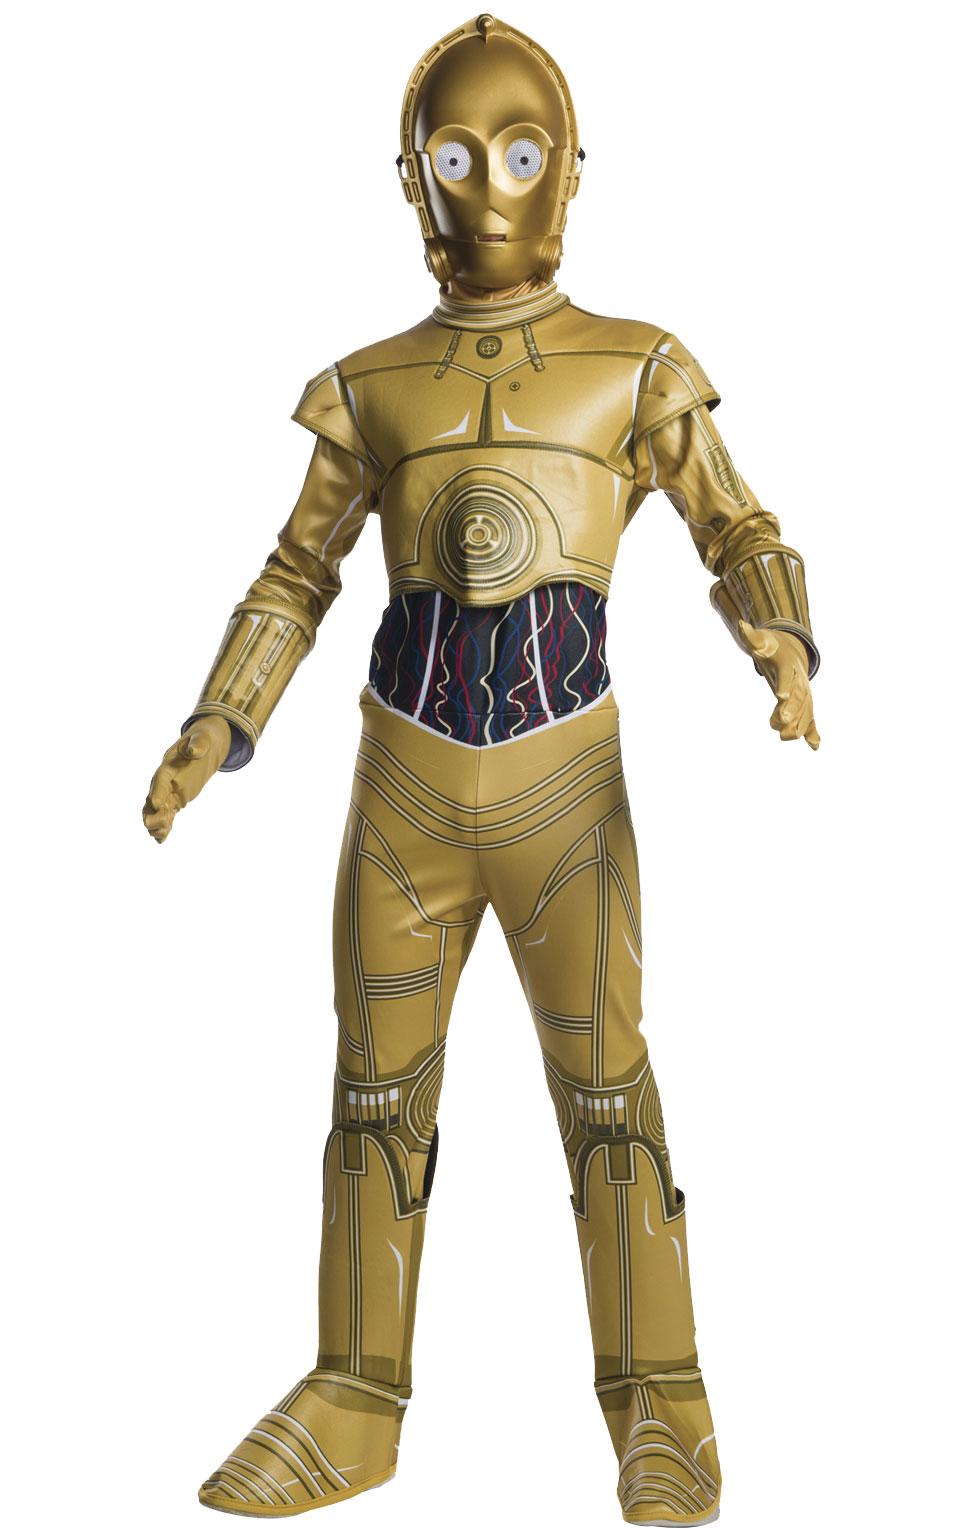 C-3PO Star Wars Fancy Dress for Children by Rubies 640557 available here at Karnival Costumes online party shop